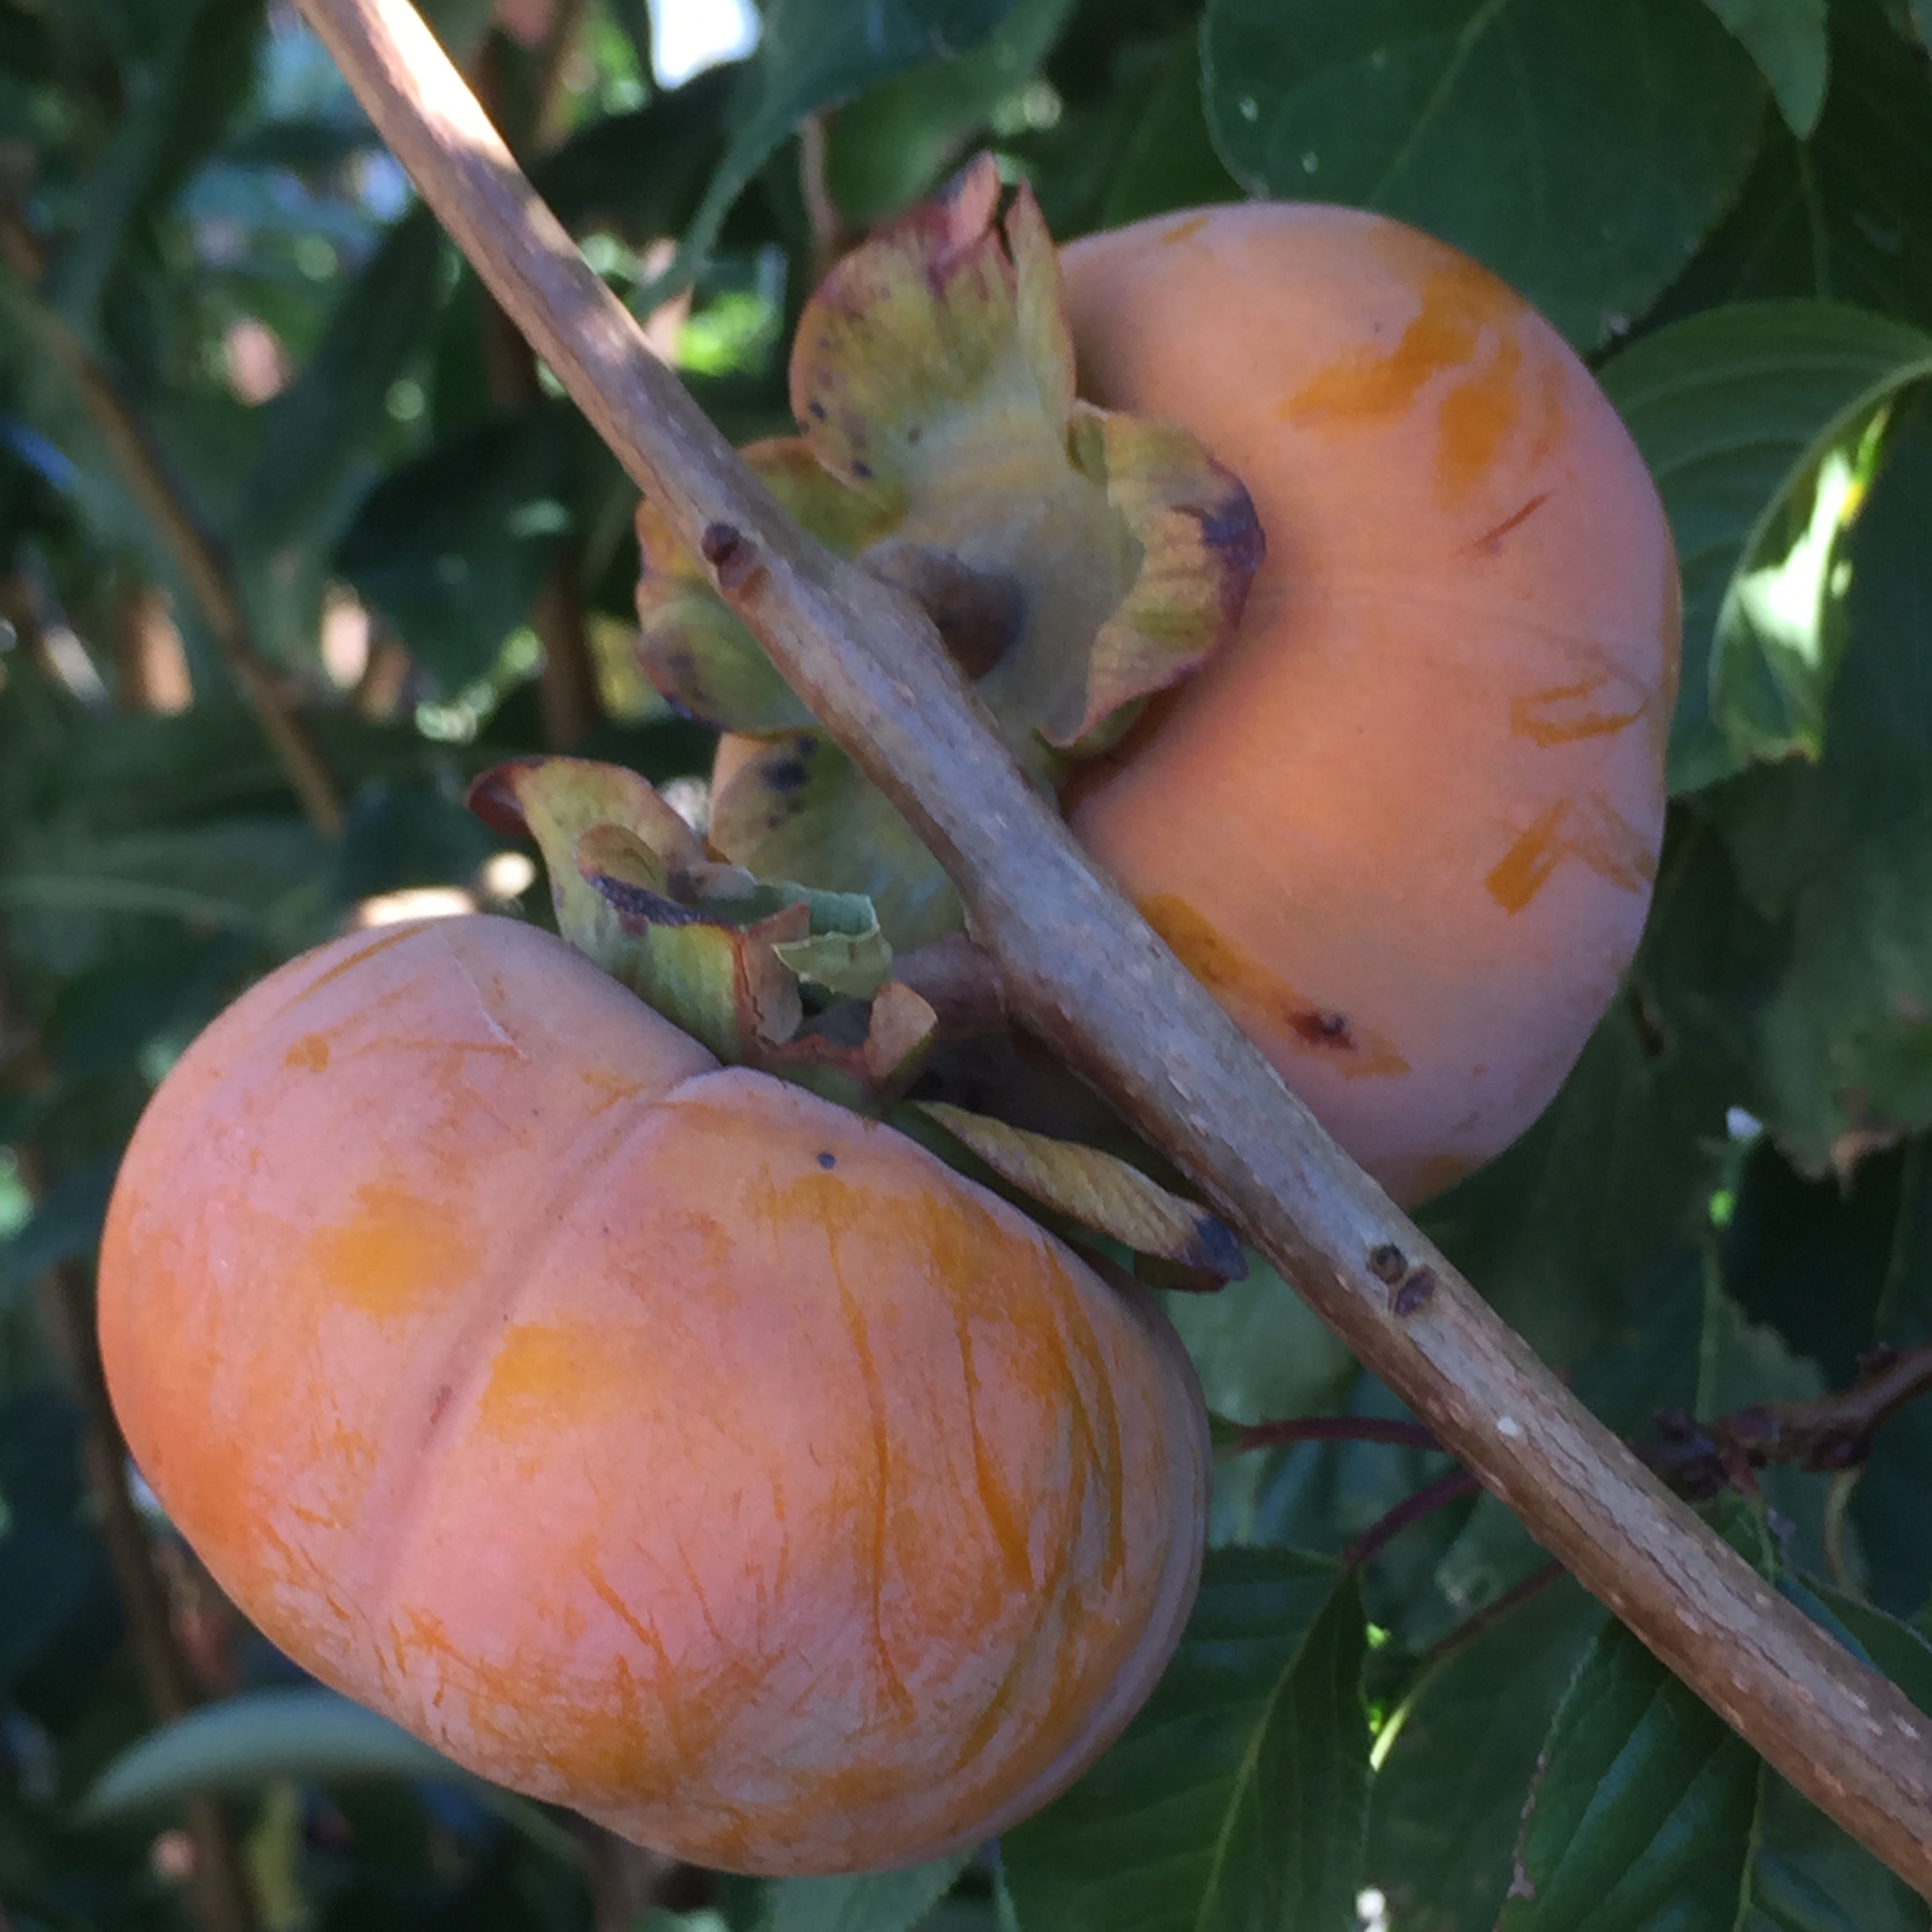 Baking Persimmons v. Eating Persimmons - Orchard Nursery